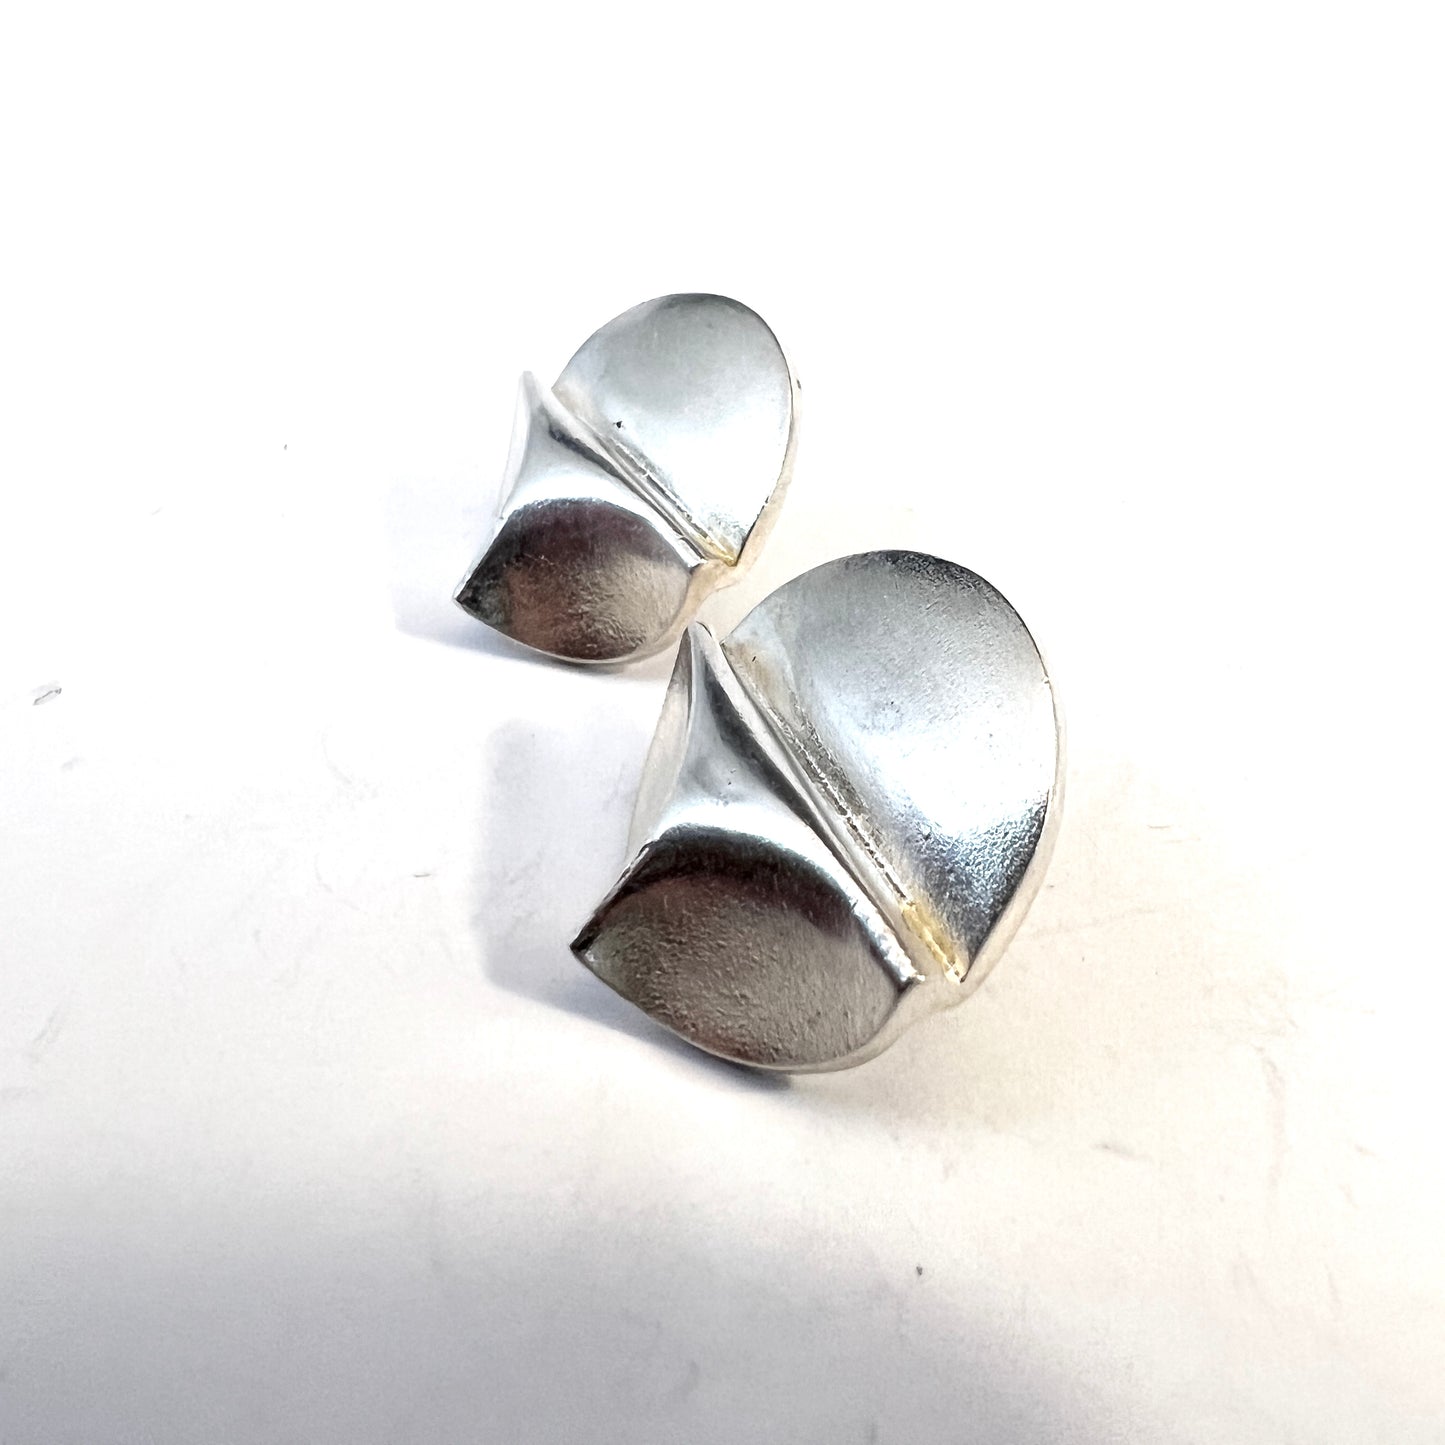 Bjorn Weckstrom, Lapponia Finland 1976. Vintage Sterling Silver Earrings. Design: Southern Triangle.